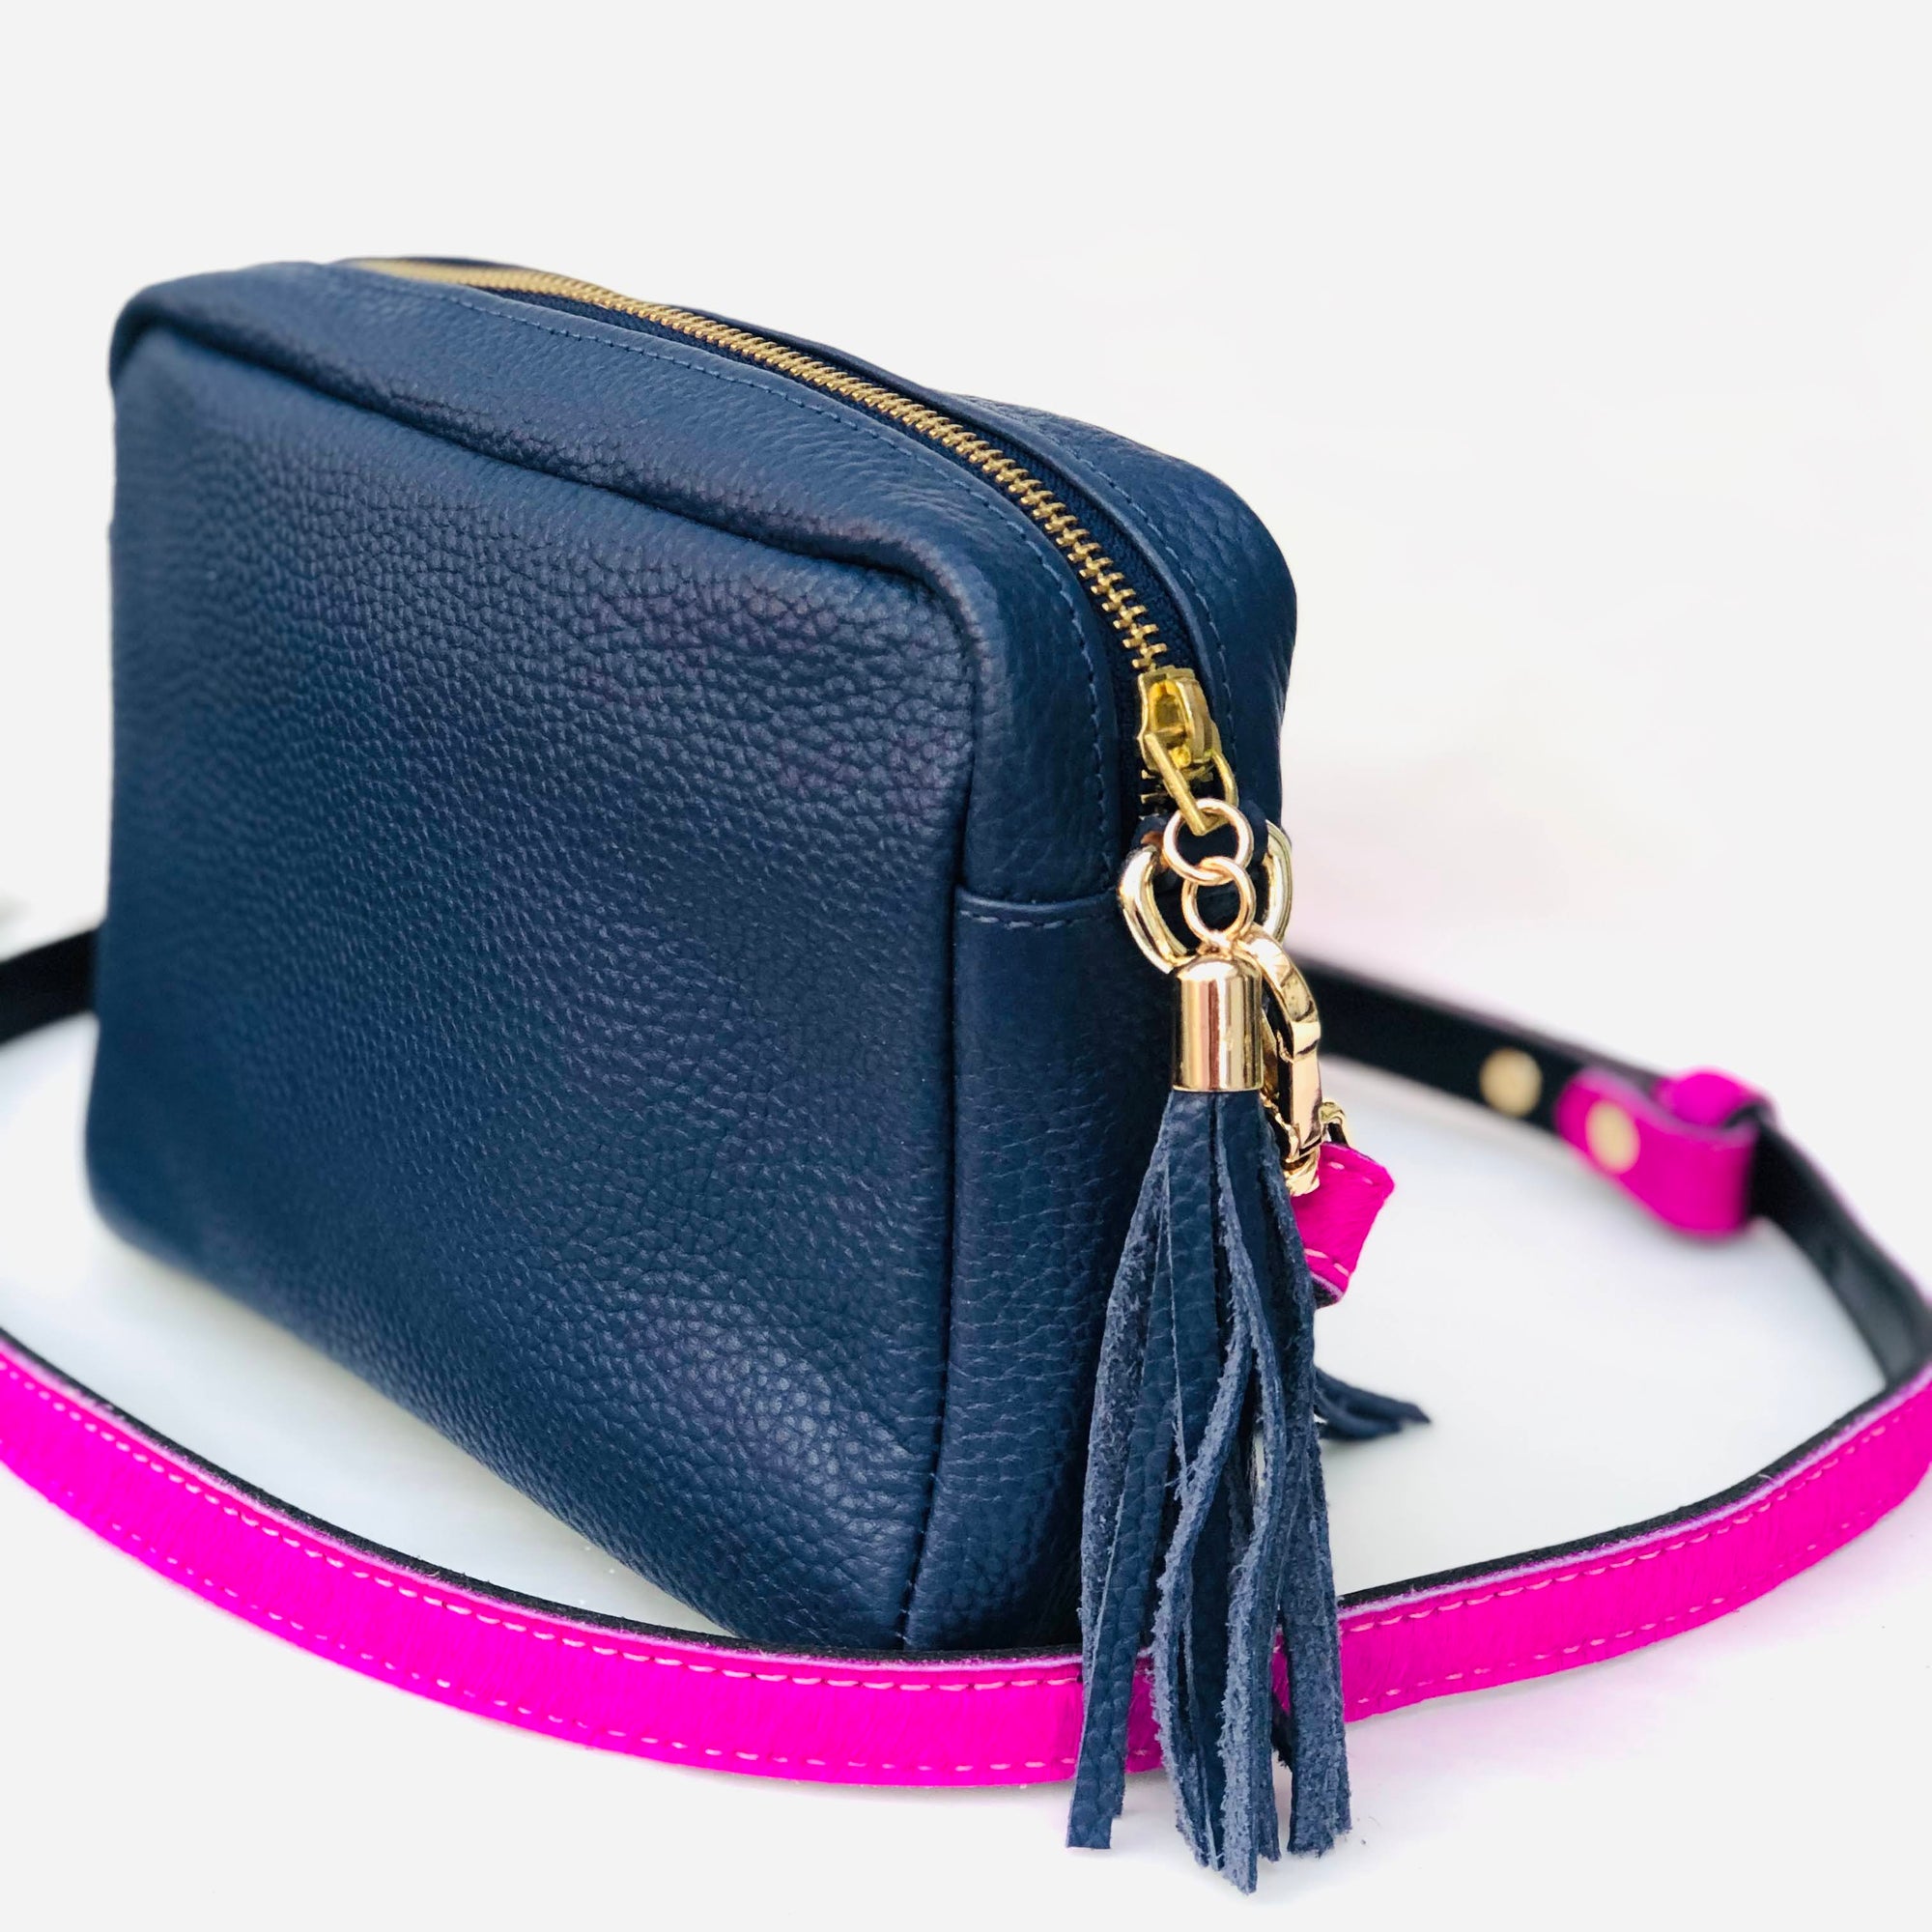 Neon Pink Skinny Replacement Shoulder Bag Strap with blue leather bag